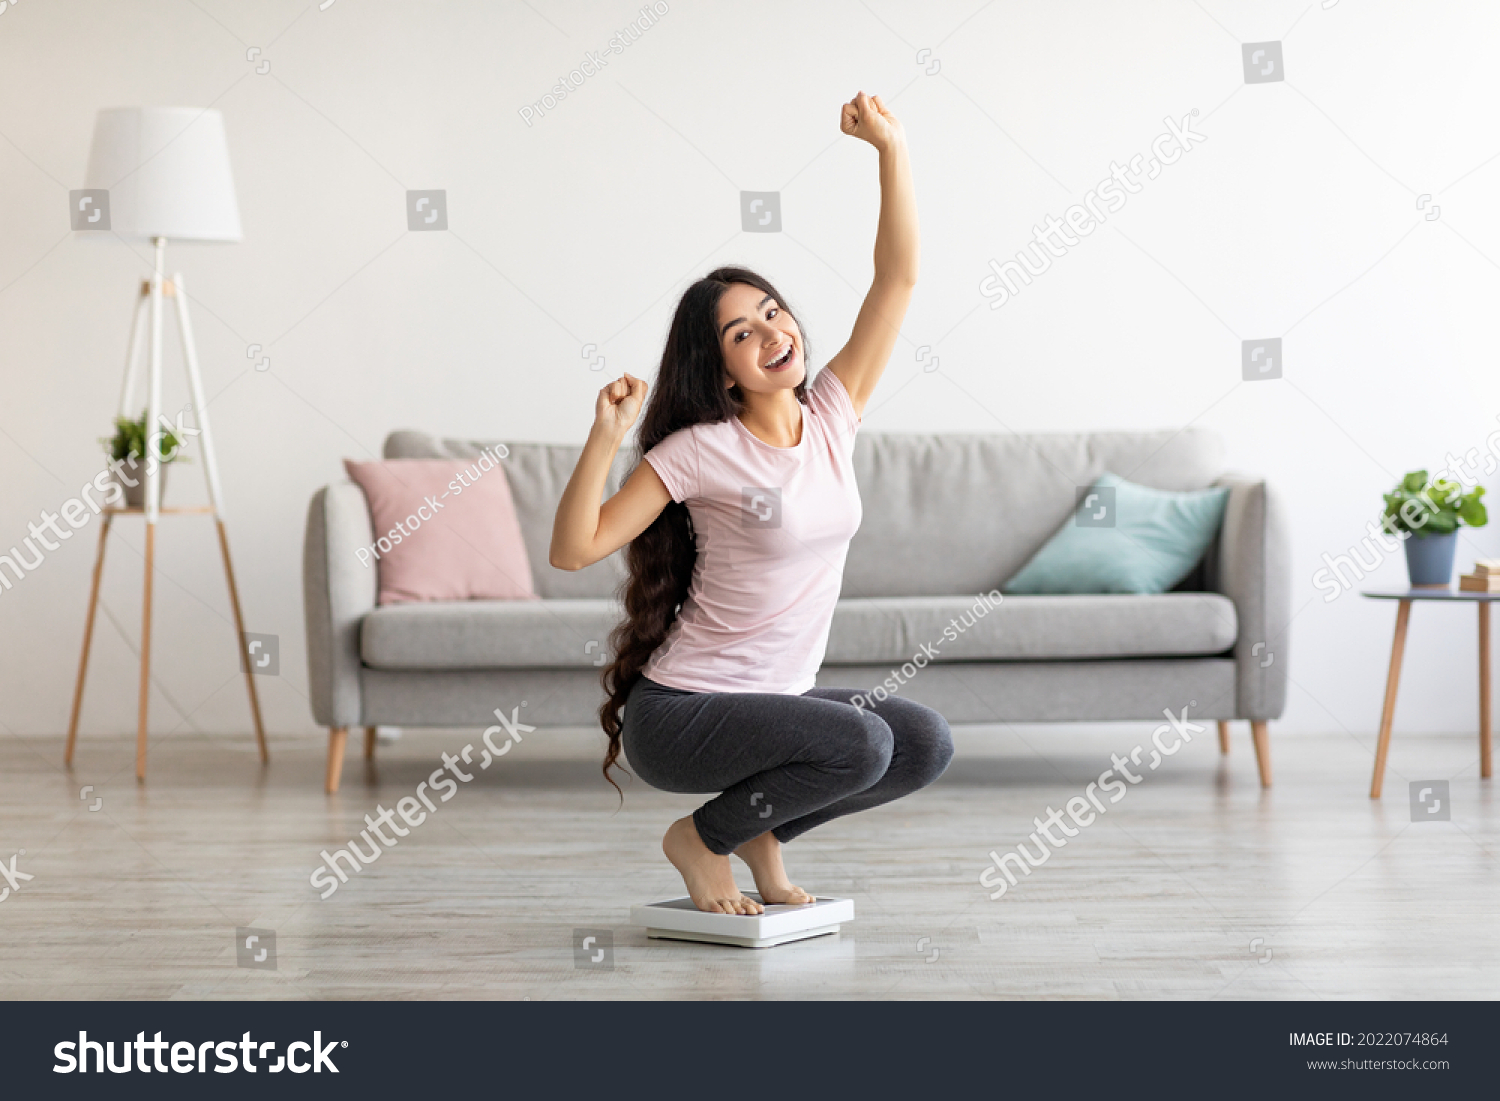 Overjoyed Indian woman sitting on scales, gesturing YES, excited over result of her weight loss diet at home. Millennial Asian lady achieving her slimming goal, copy space #2022074864